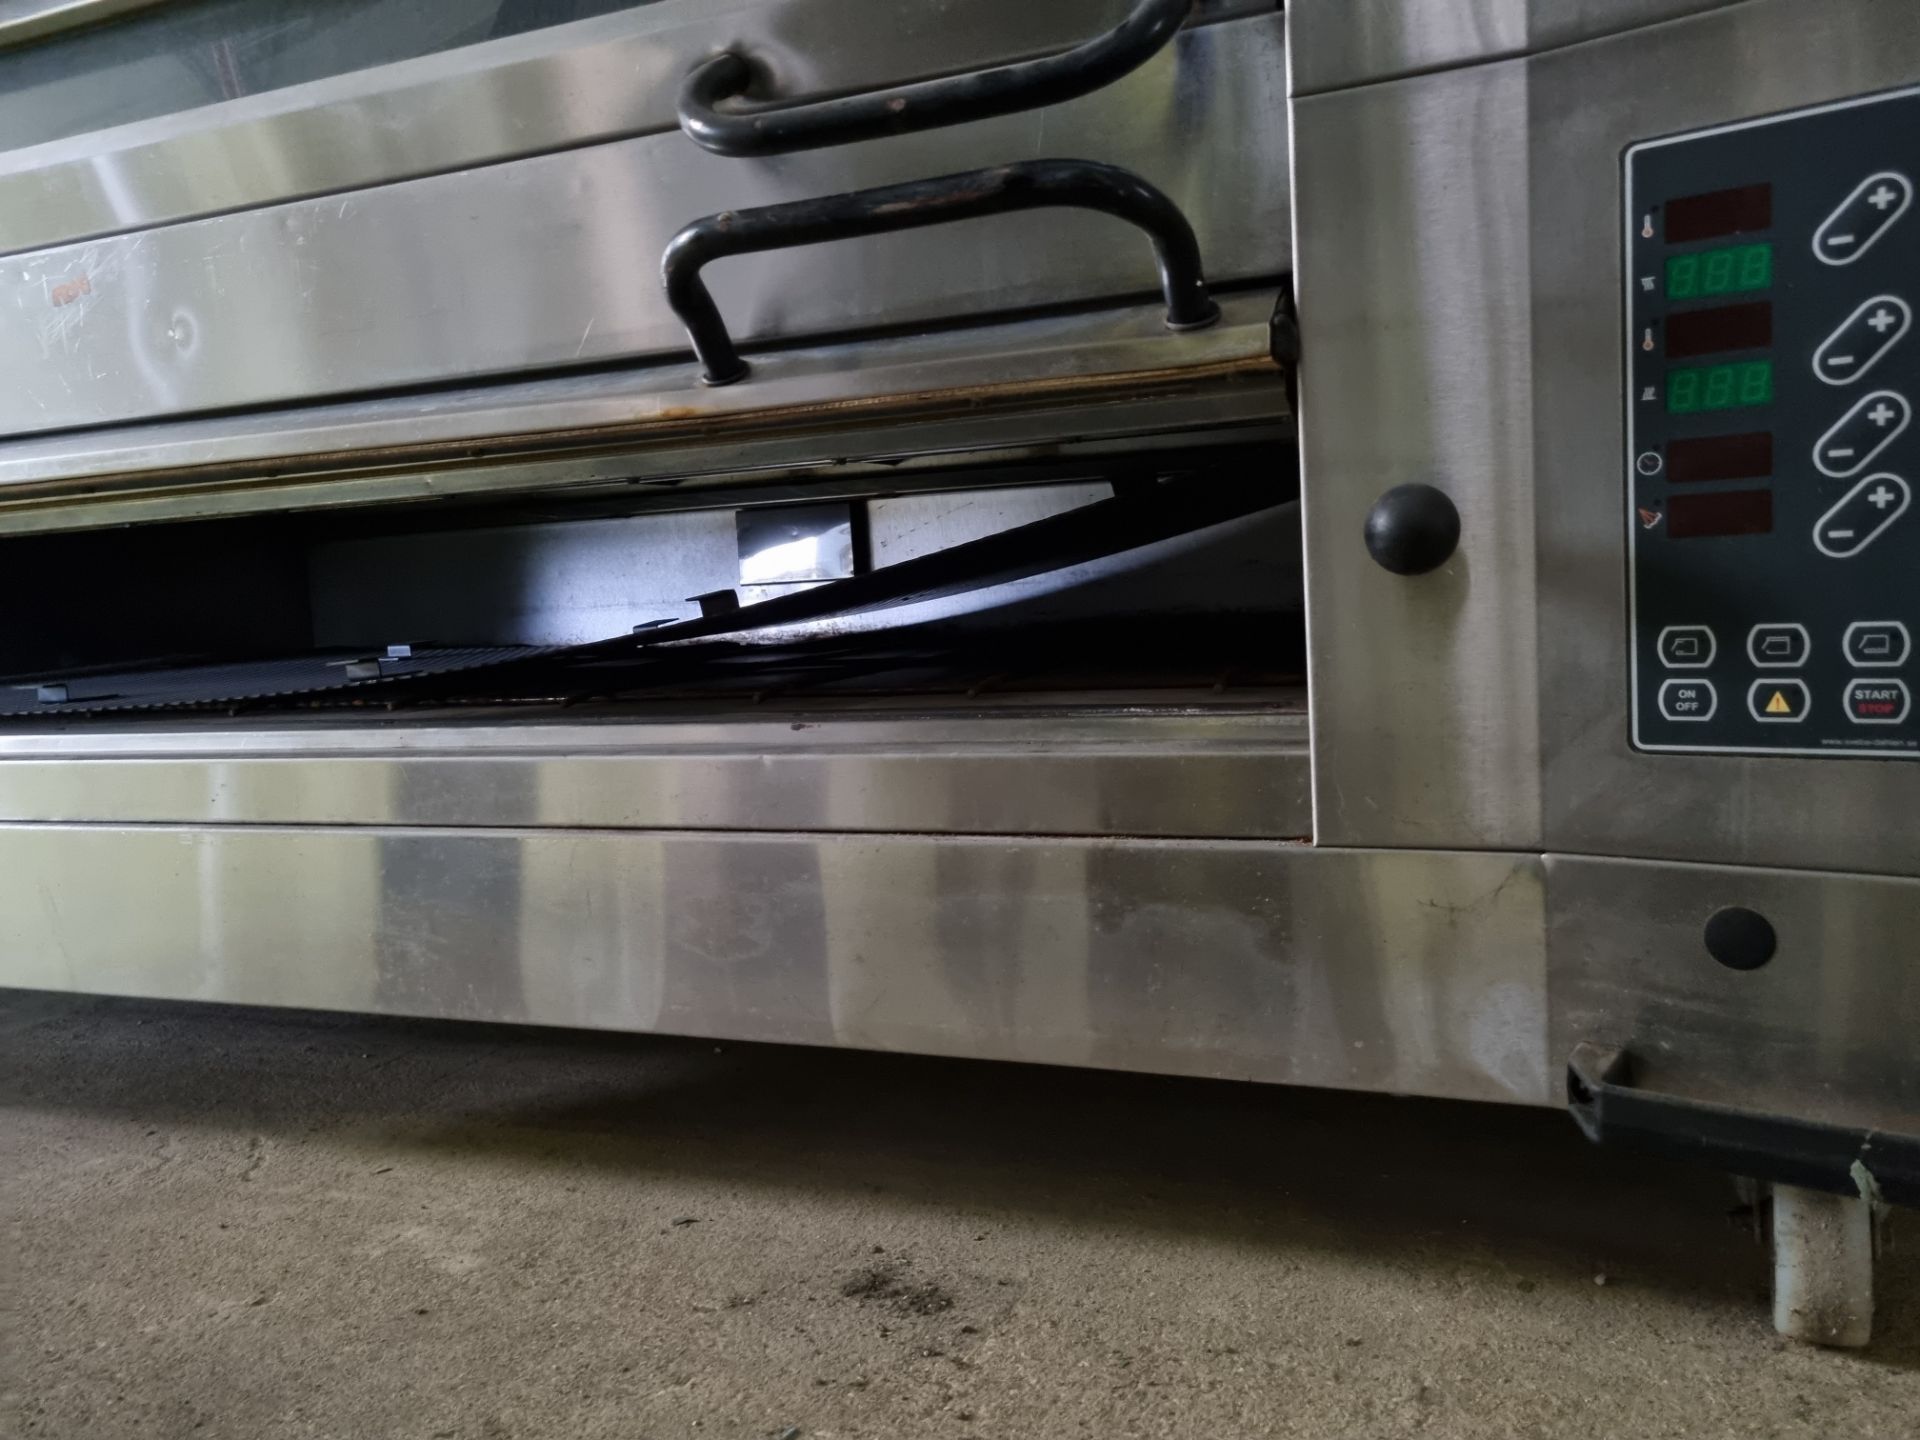 Sveba Dahlen Electric 5 Deck Oven with steam. 1600 x 800 mm deck. Mobile. Each Deck 1580 x 900 x 150 - Image 4 of 4